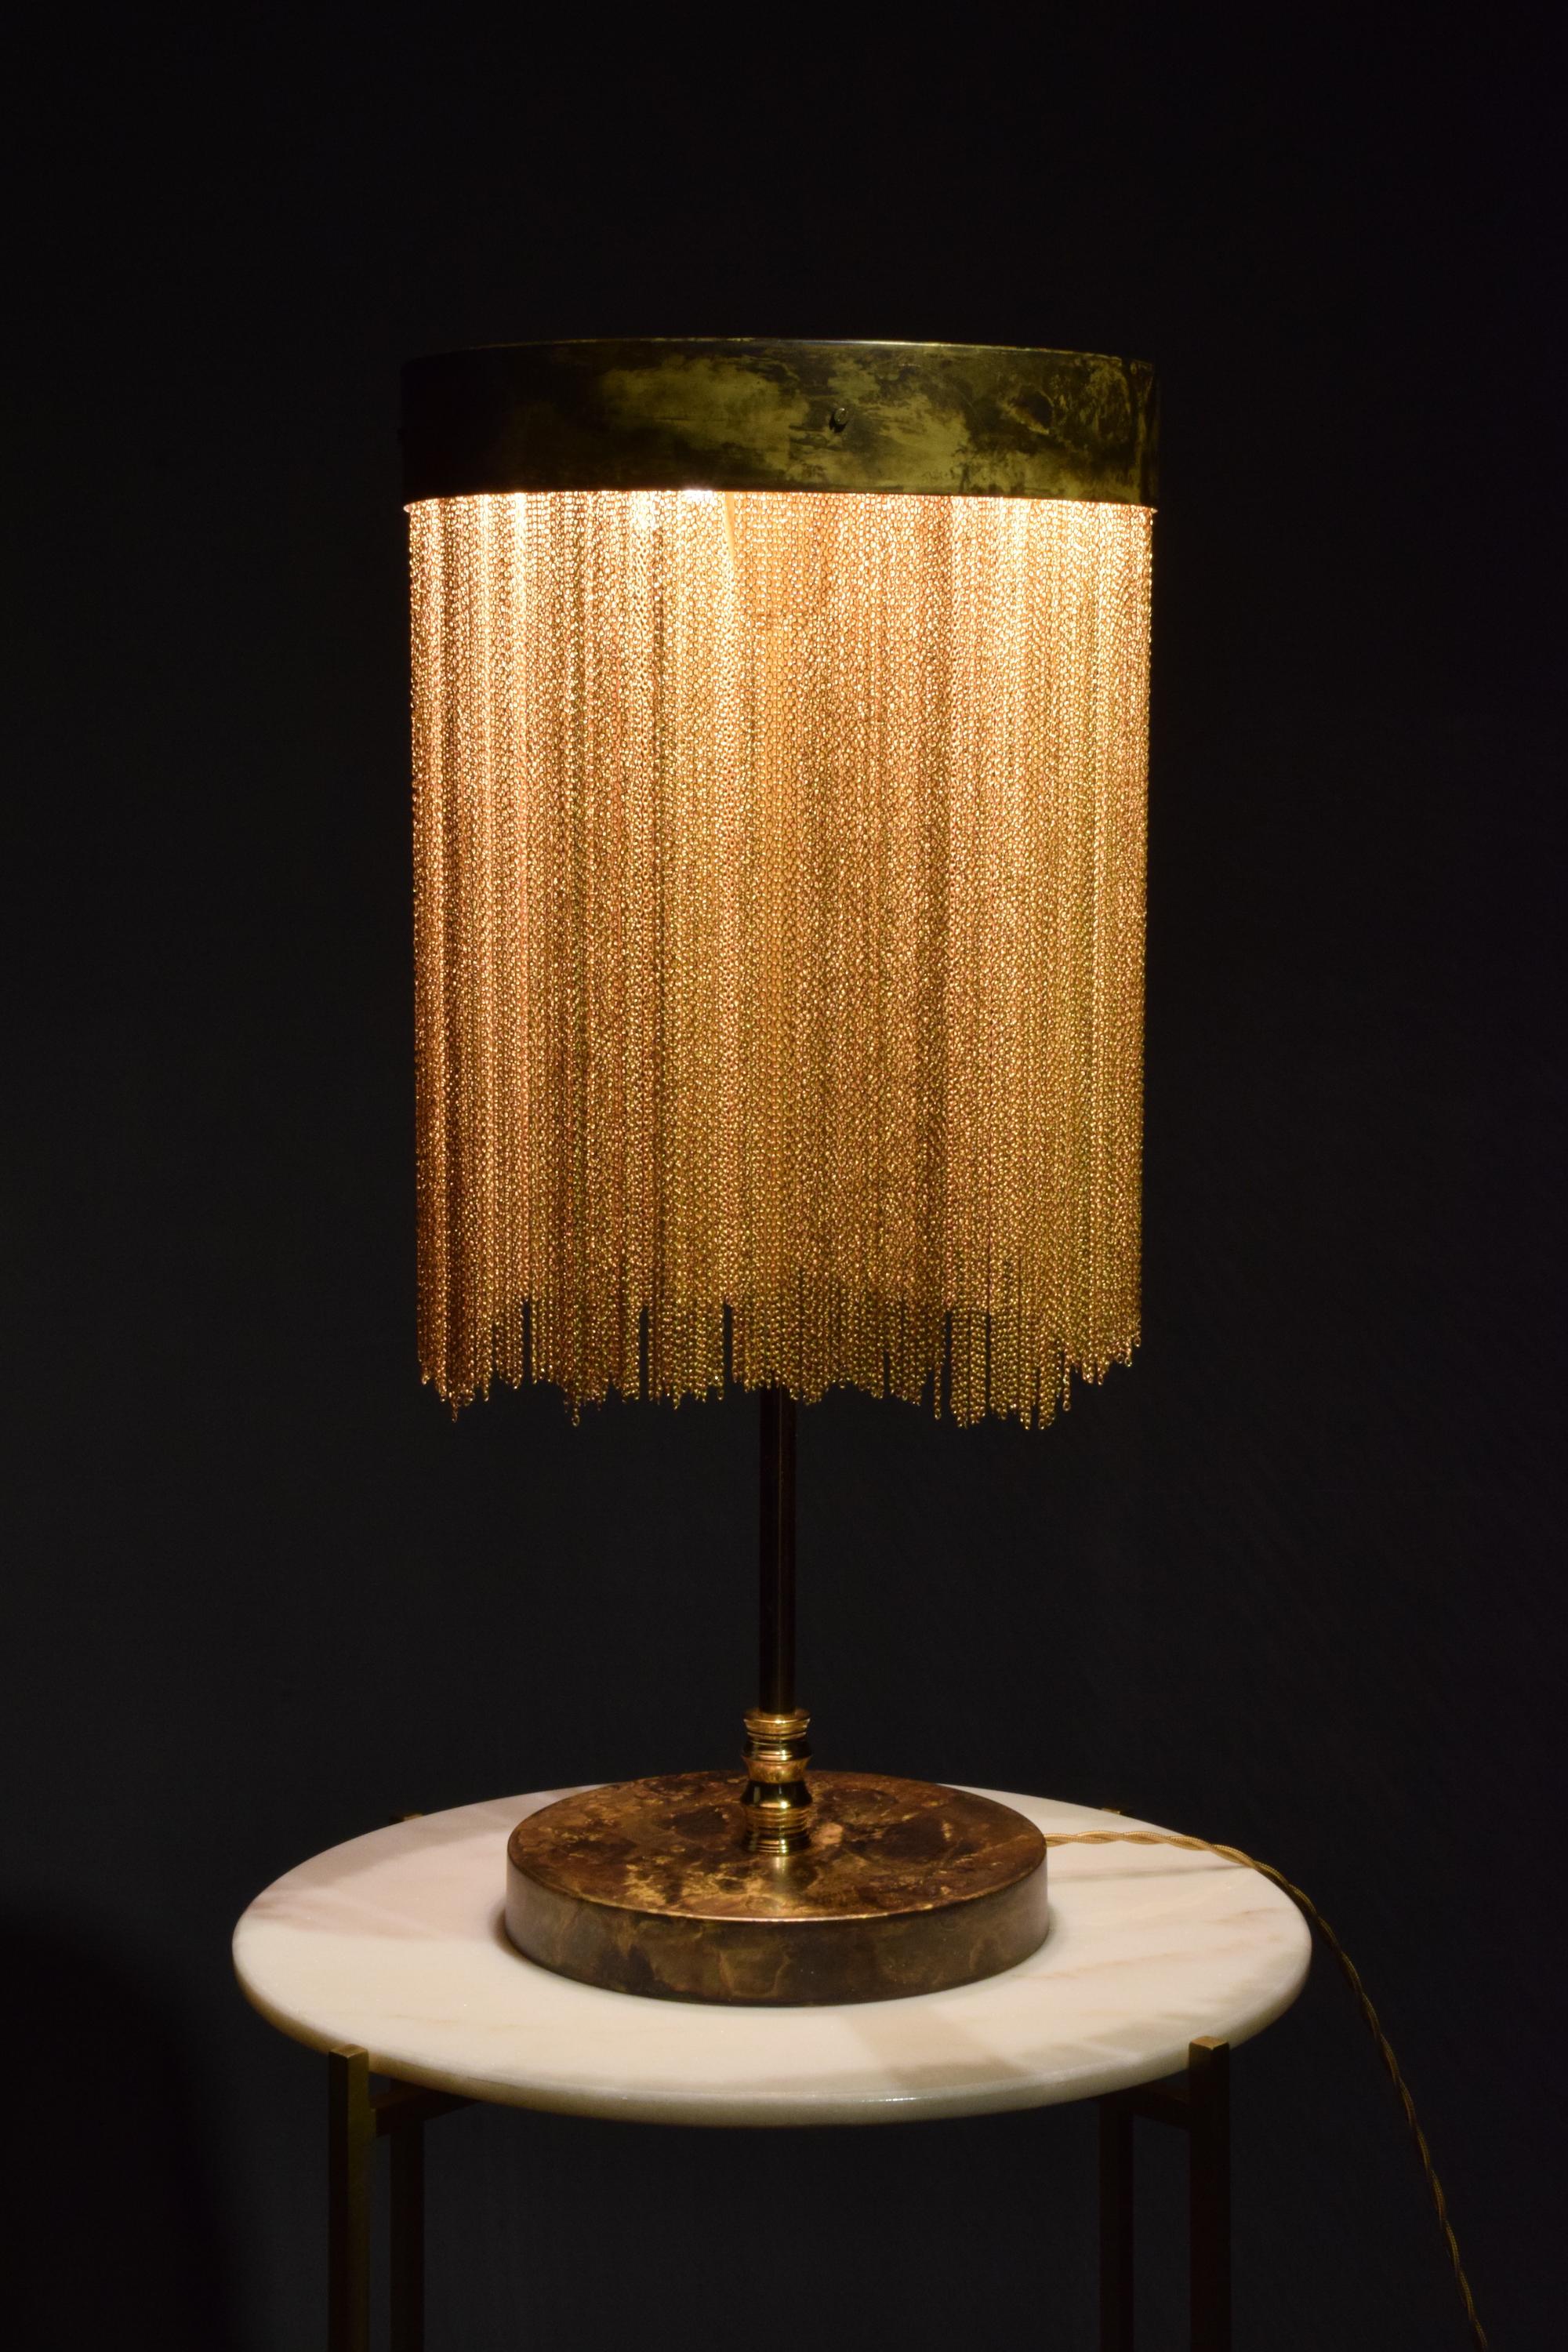 Pictured here in an antique brass nish, this light is designed with a curtain of brass chains that play with the reaction by di using stripes of light all-around.

Flow 2 by JA Studio
The inspiration behind this collection was to create modern